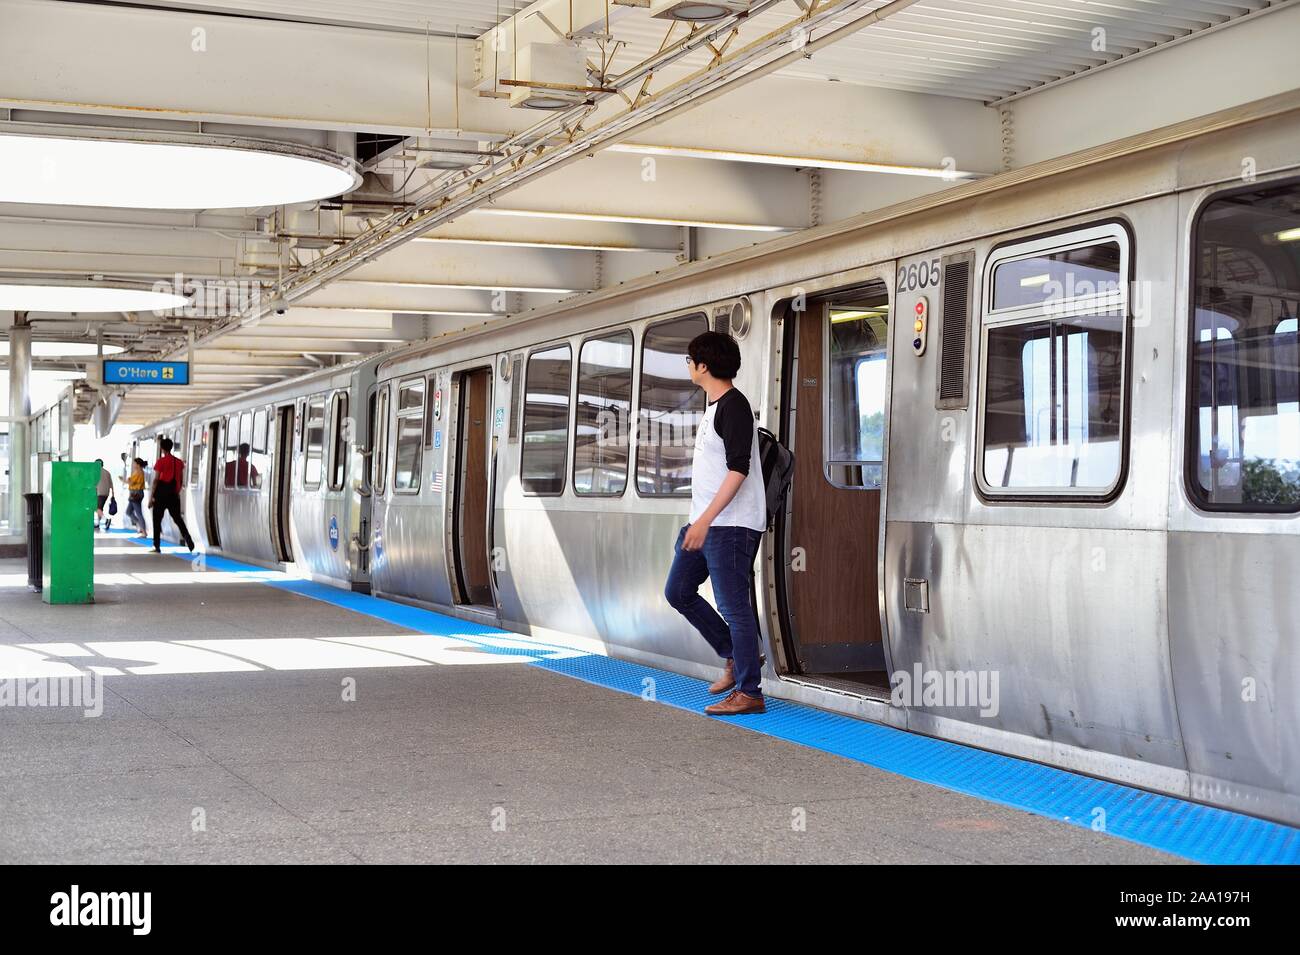 Chicago, Illinois, USA. Passengers exit a CTA Blue Line rapid transit train at the Rosemont Station on its journey to O'Hare International Airport. Stock Photo